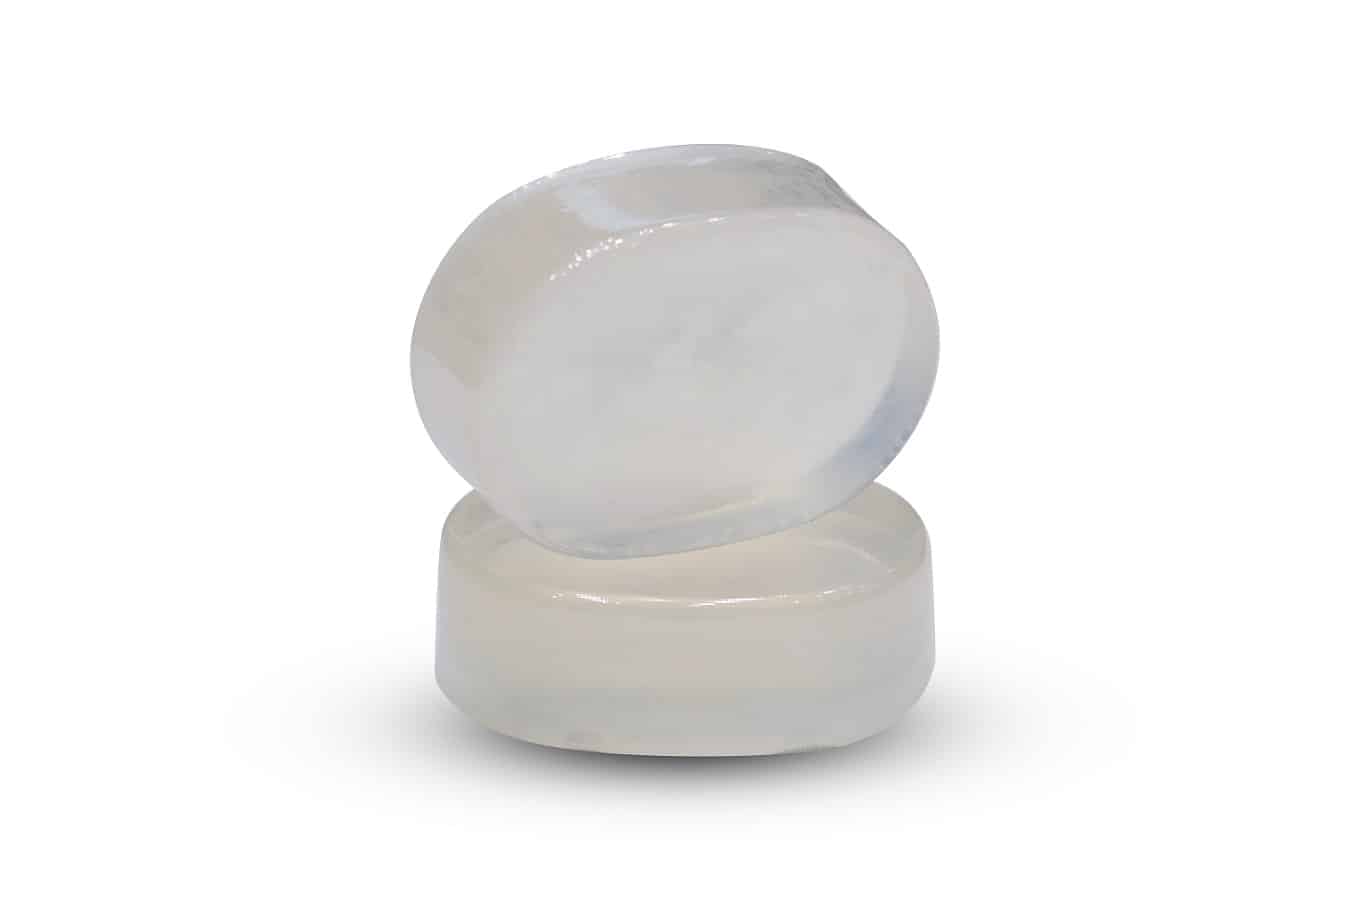 Royal Trends Ultra Clear Transparent Soap Base Made with Pure